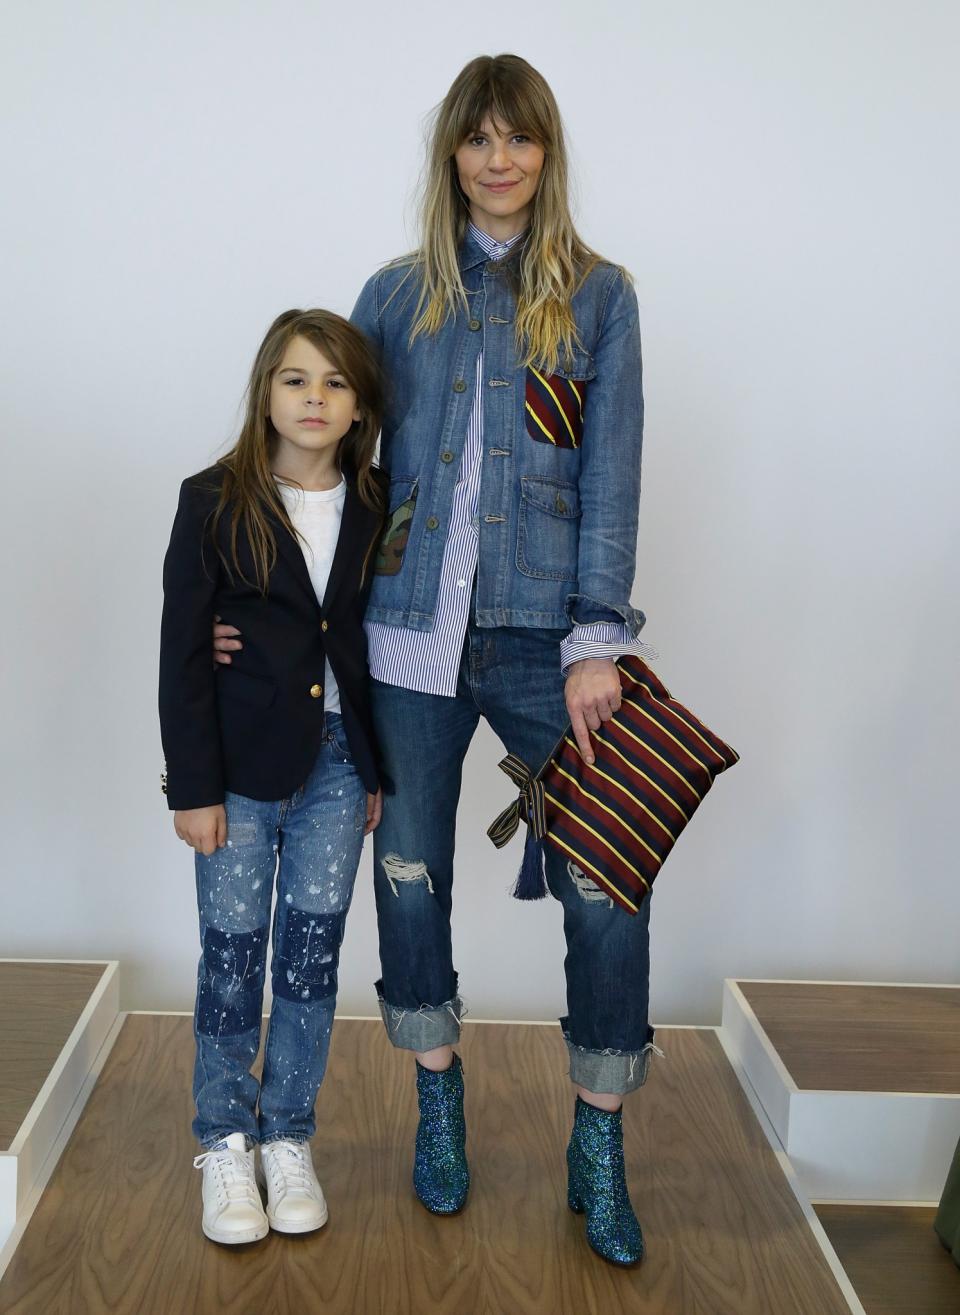 Young mother and daughter combo at J.Crew looking cute as a button.